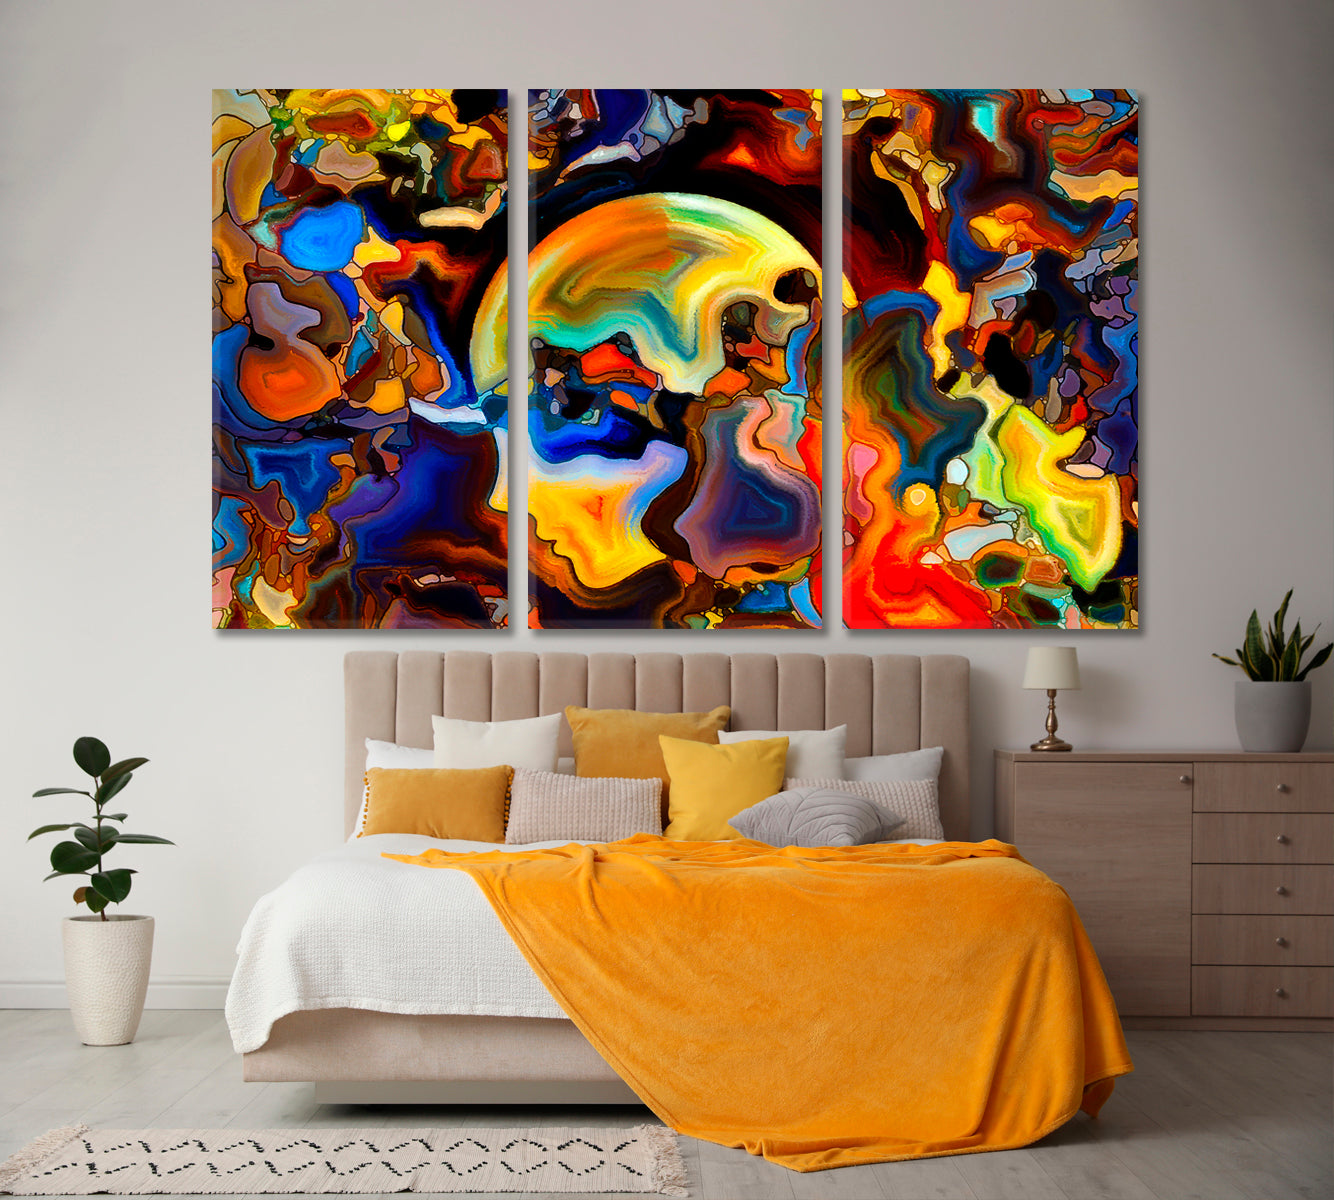 Colors Mind Shapes Abstract Art Print Artesty 3 panels 36" x 24" 